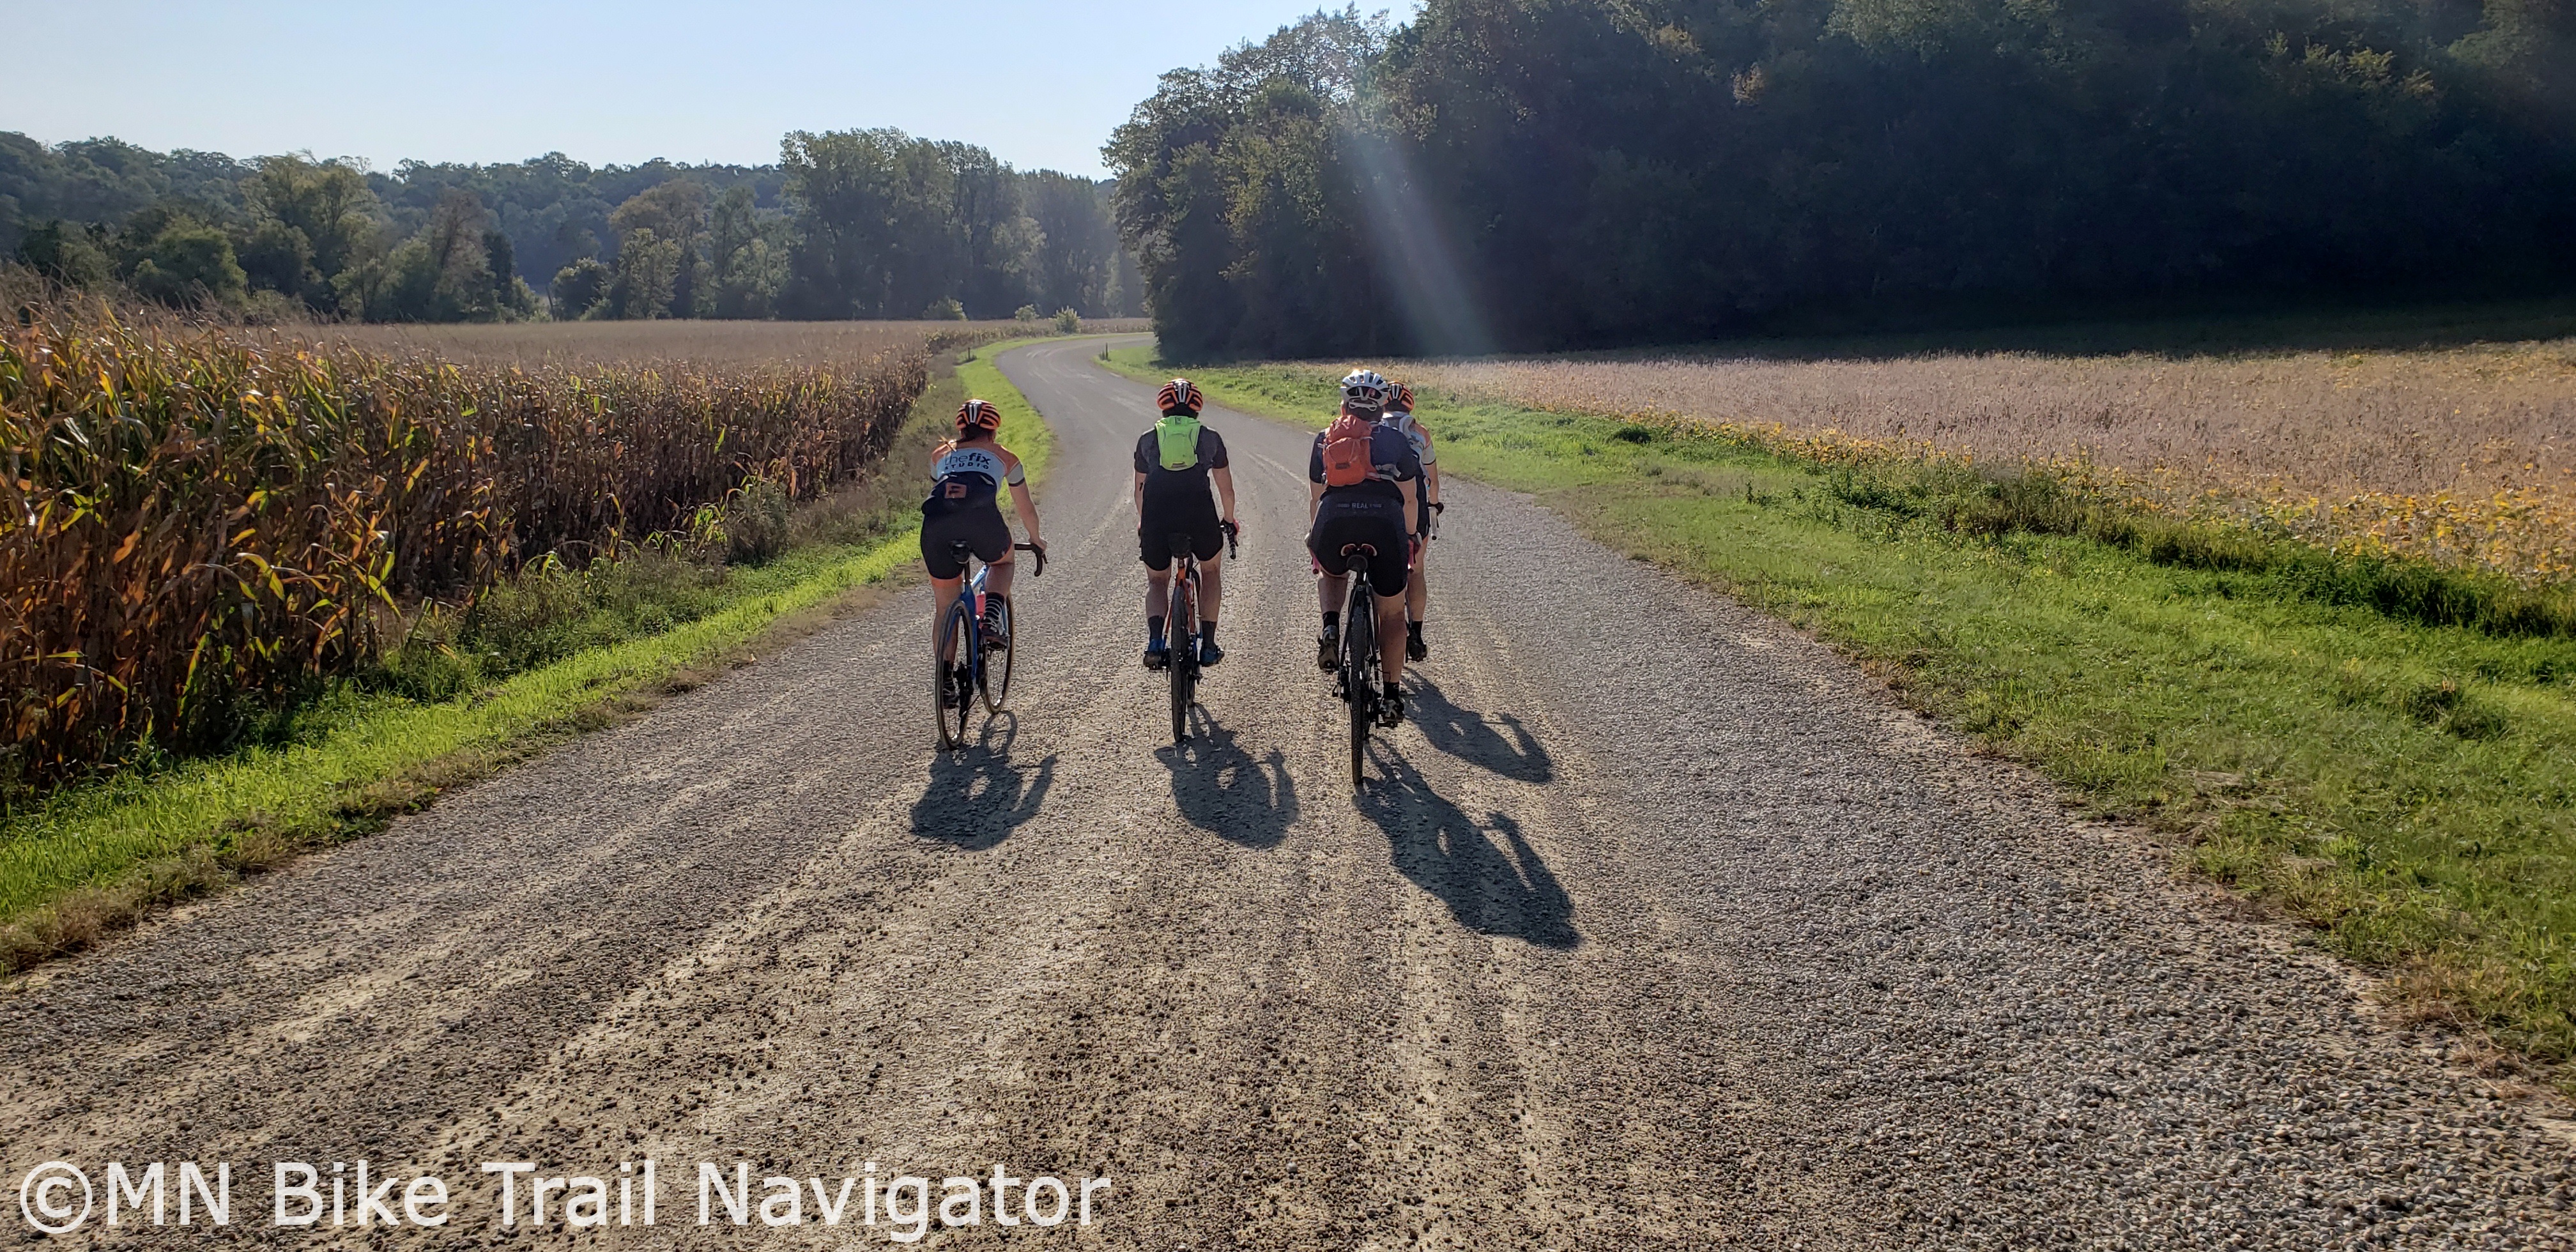 MN Bike Trail Navigator September-2022 Minnesota Bike Tours, Rides, Races and Events Schedule